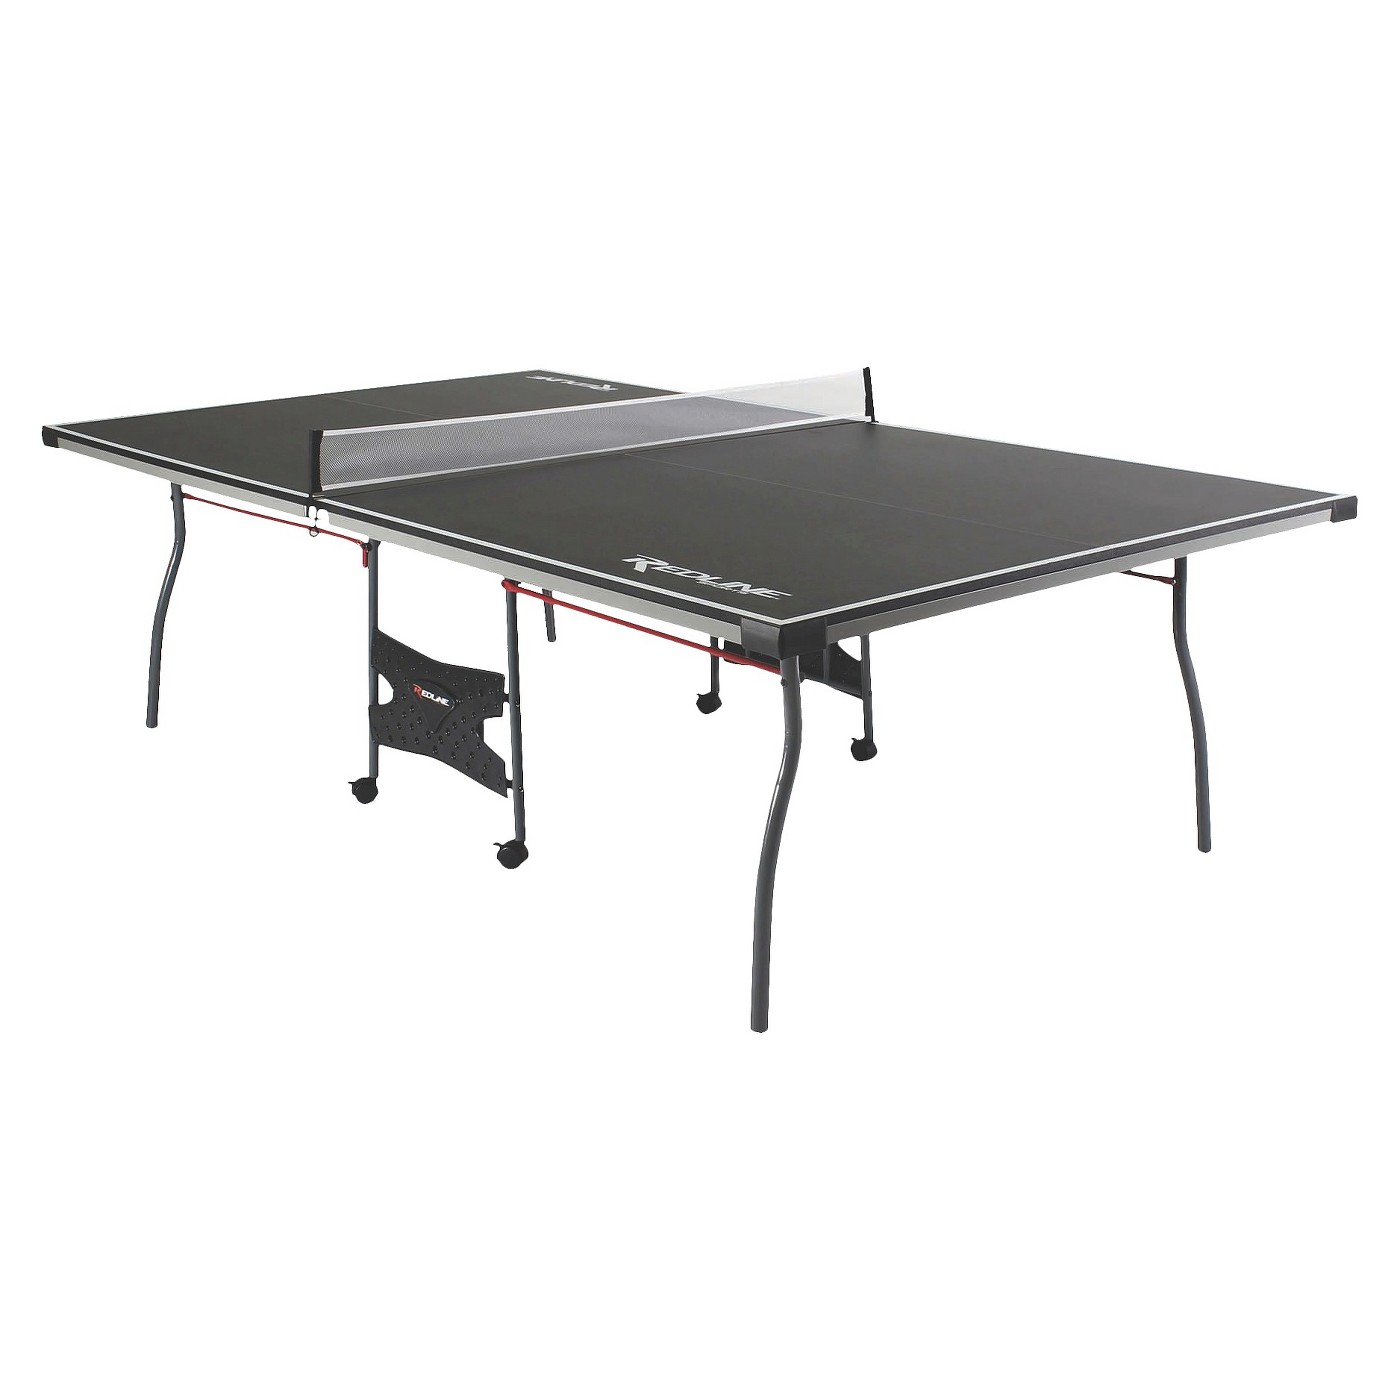 REDLINE 4pc Table Tennis Table - image 1 of 3